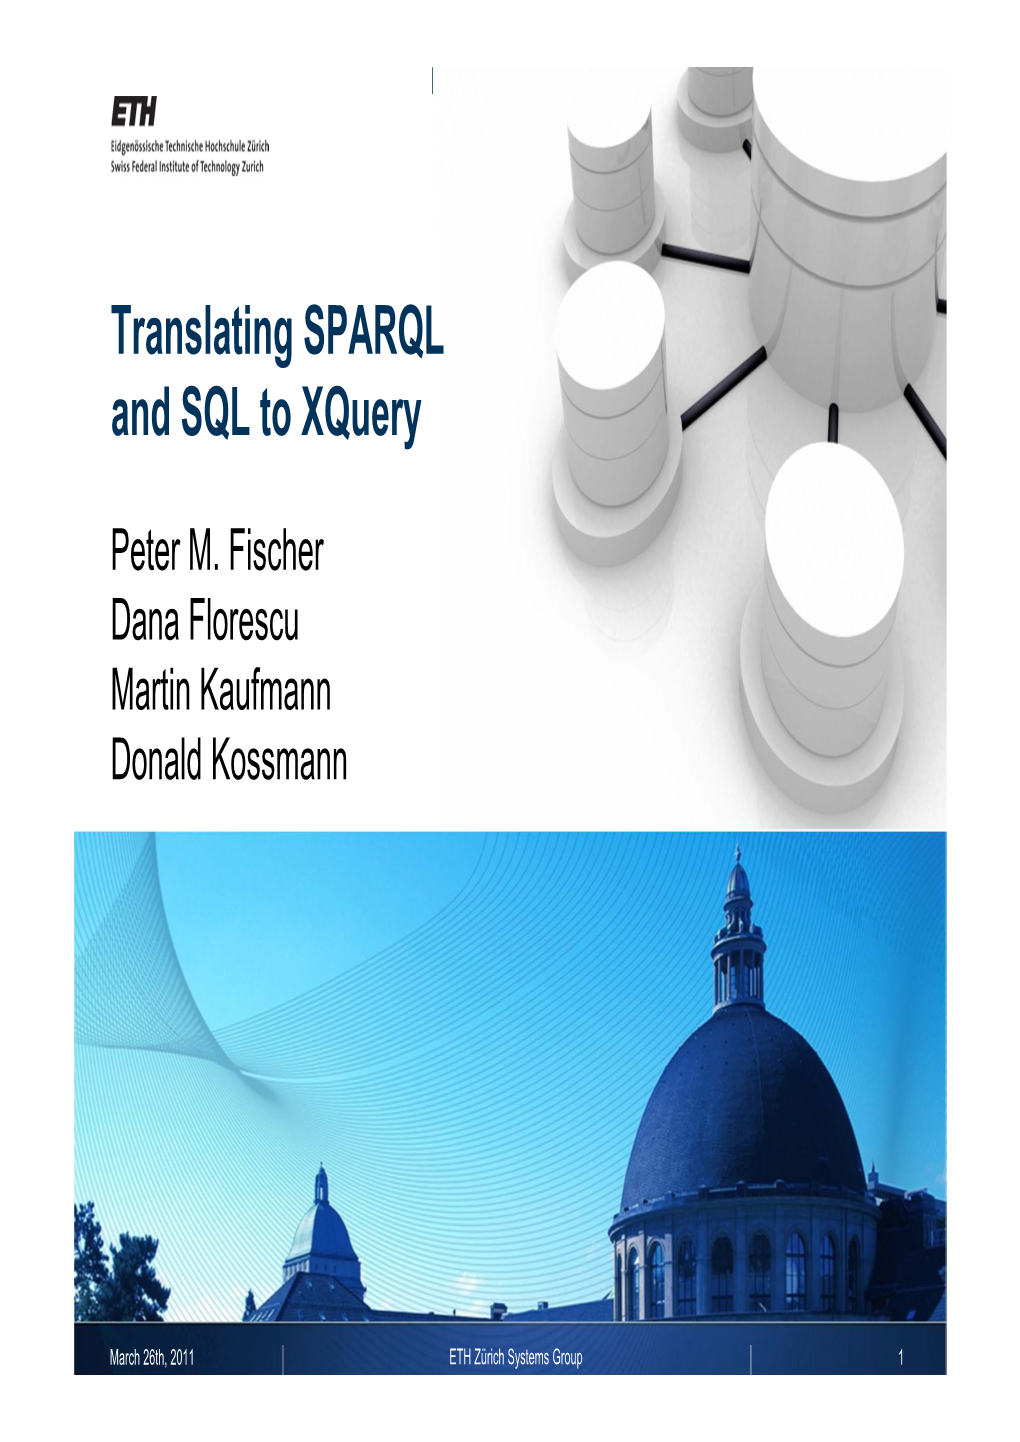 Translating SPARQL and SQL to Xquery